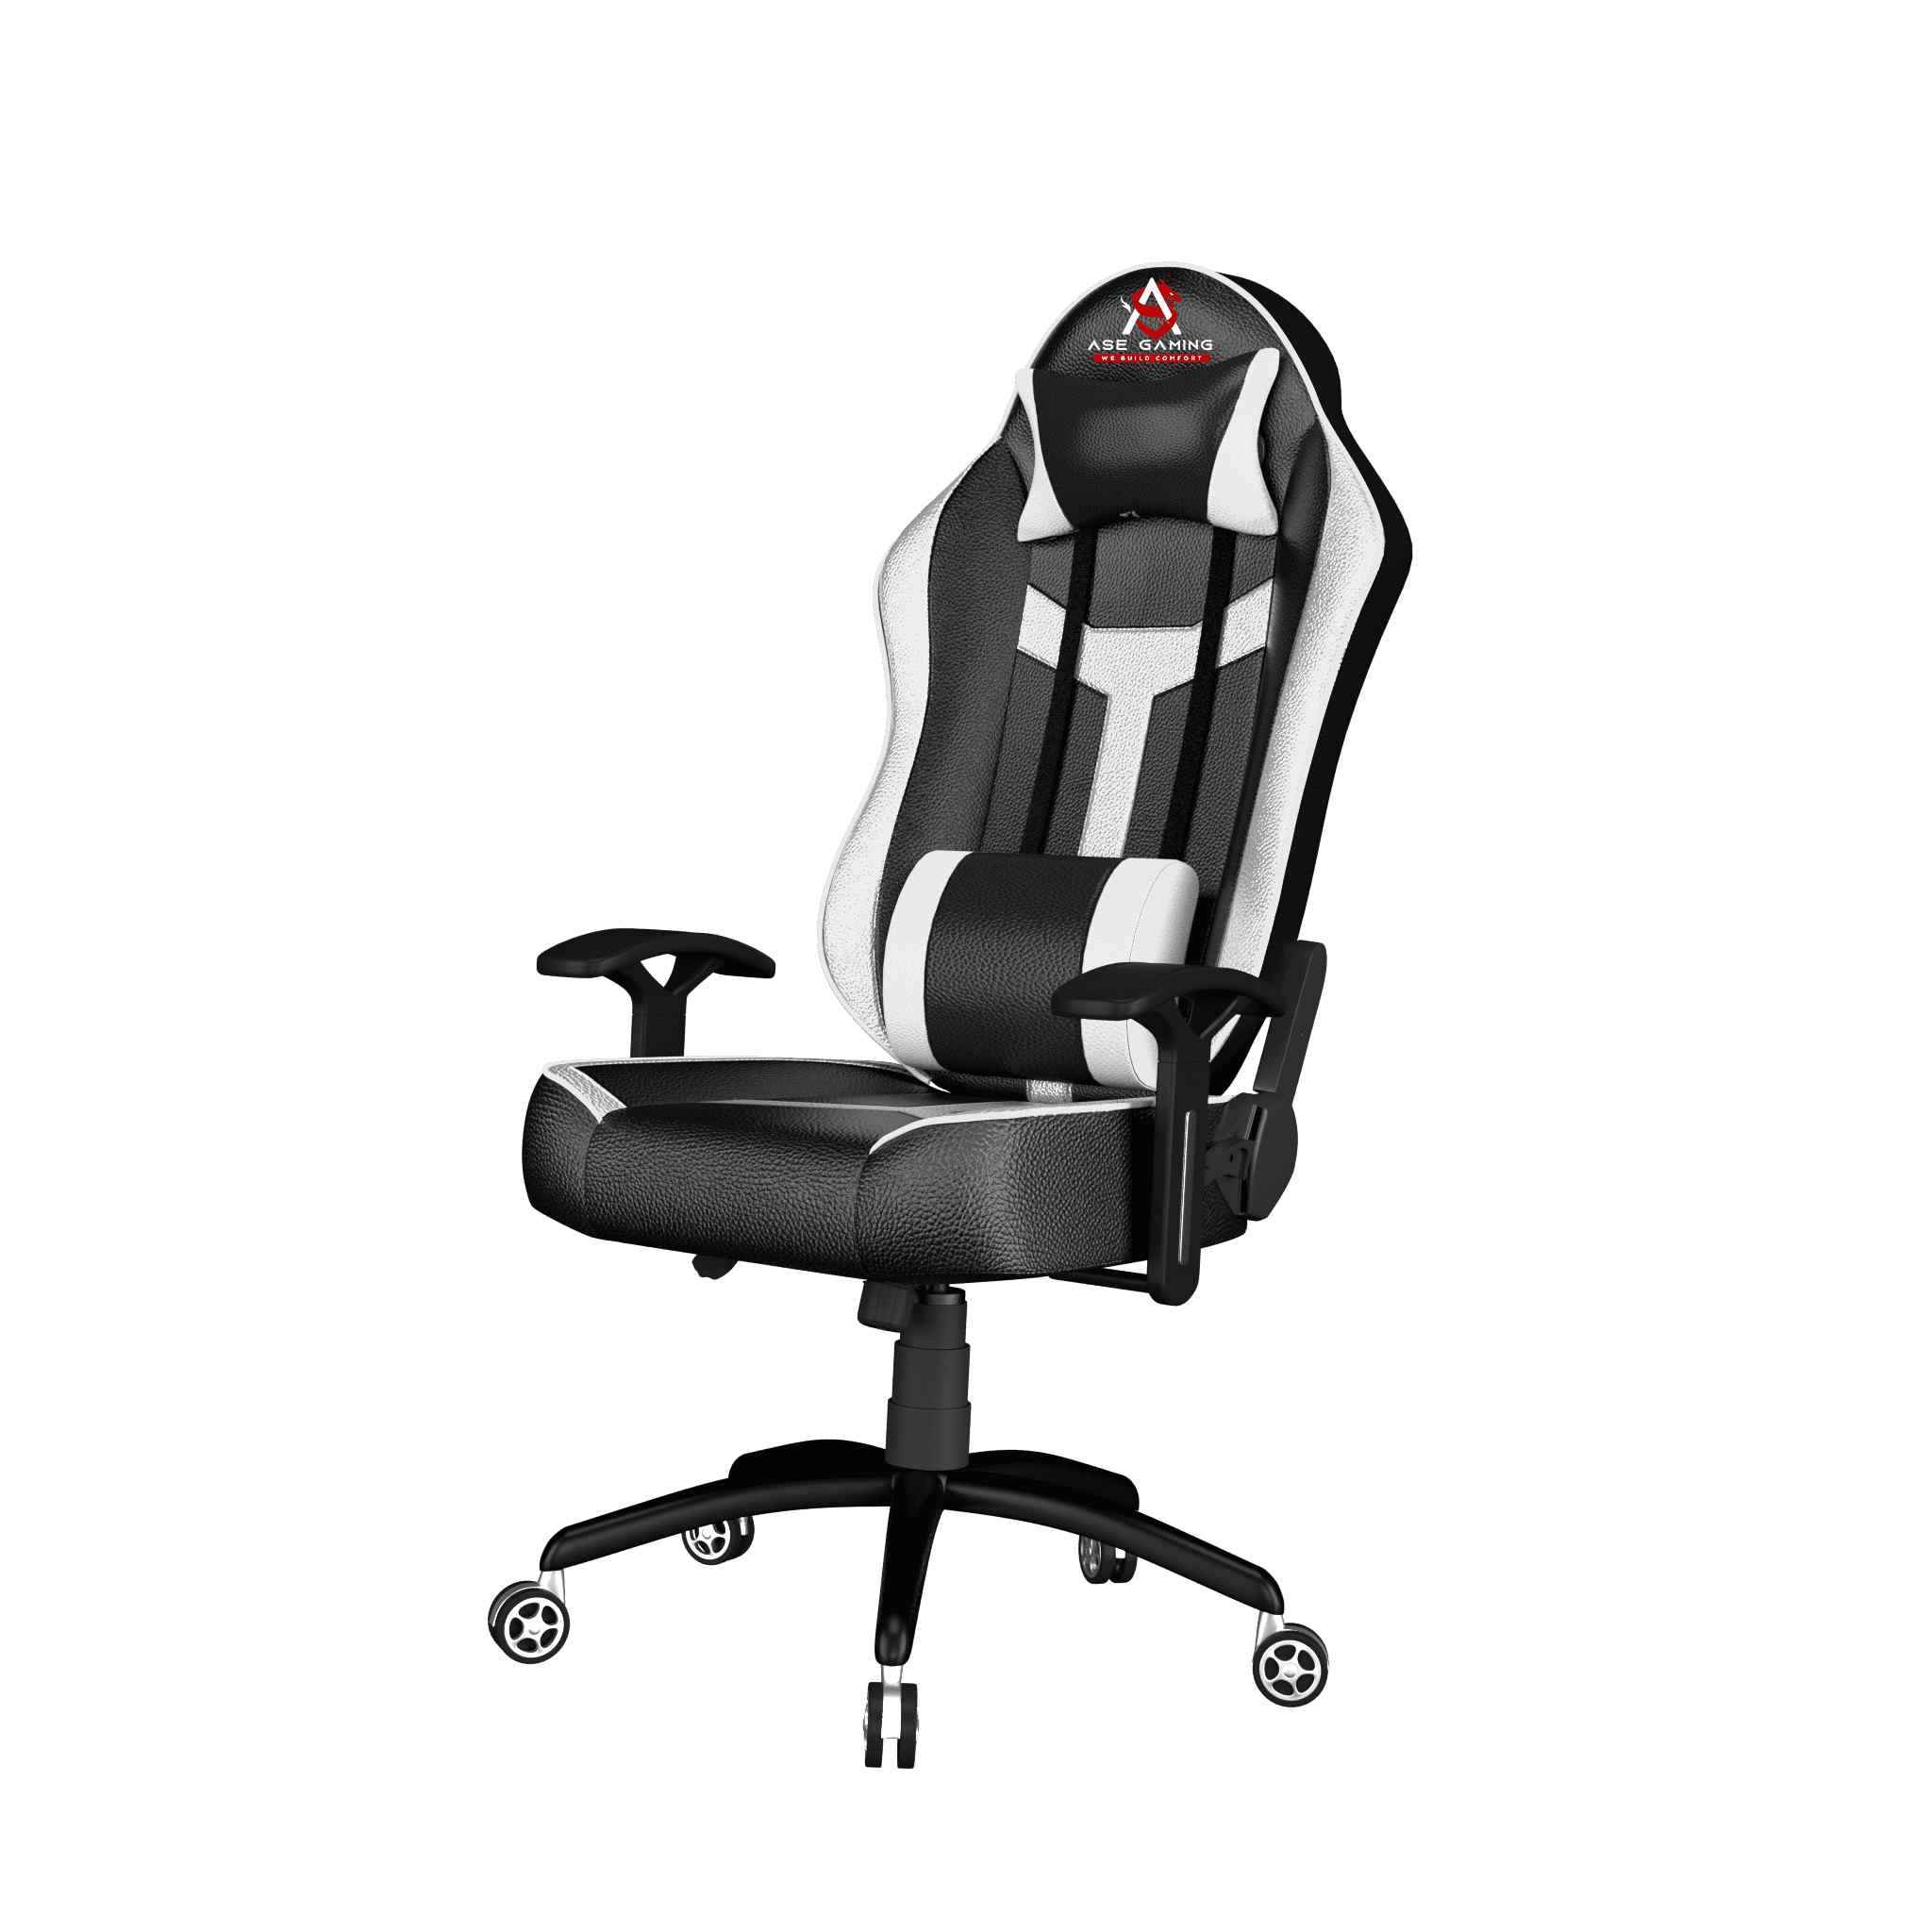 ASE Gaming Gold Series Gaming Chair with 180 Degree Recline (White & Black)